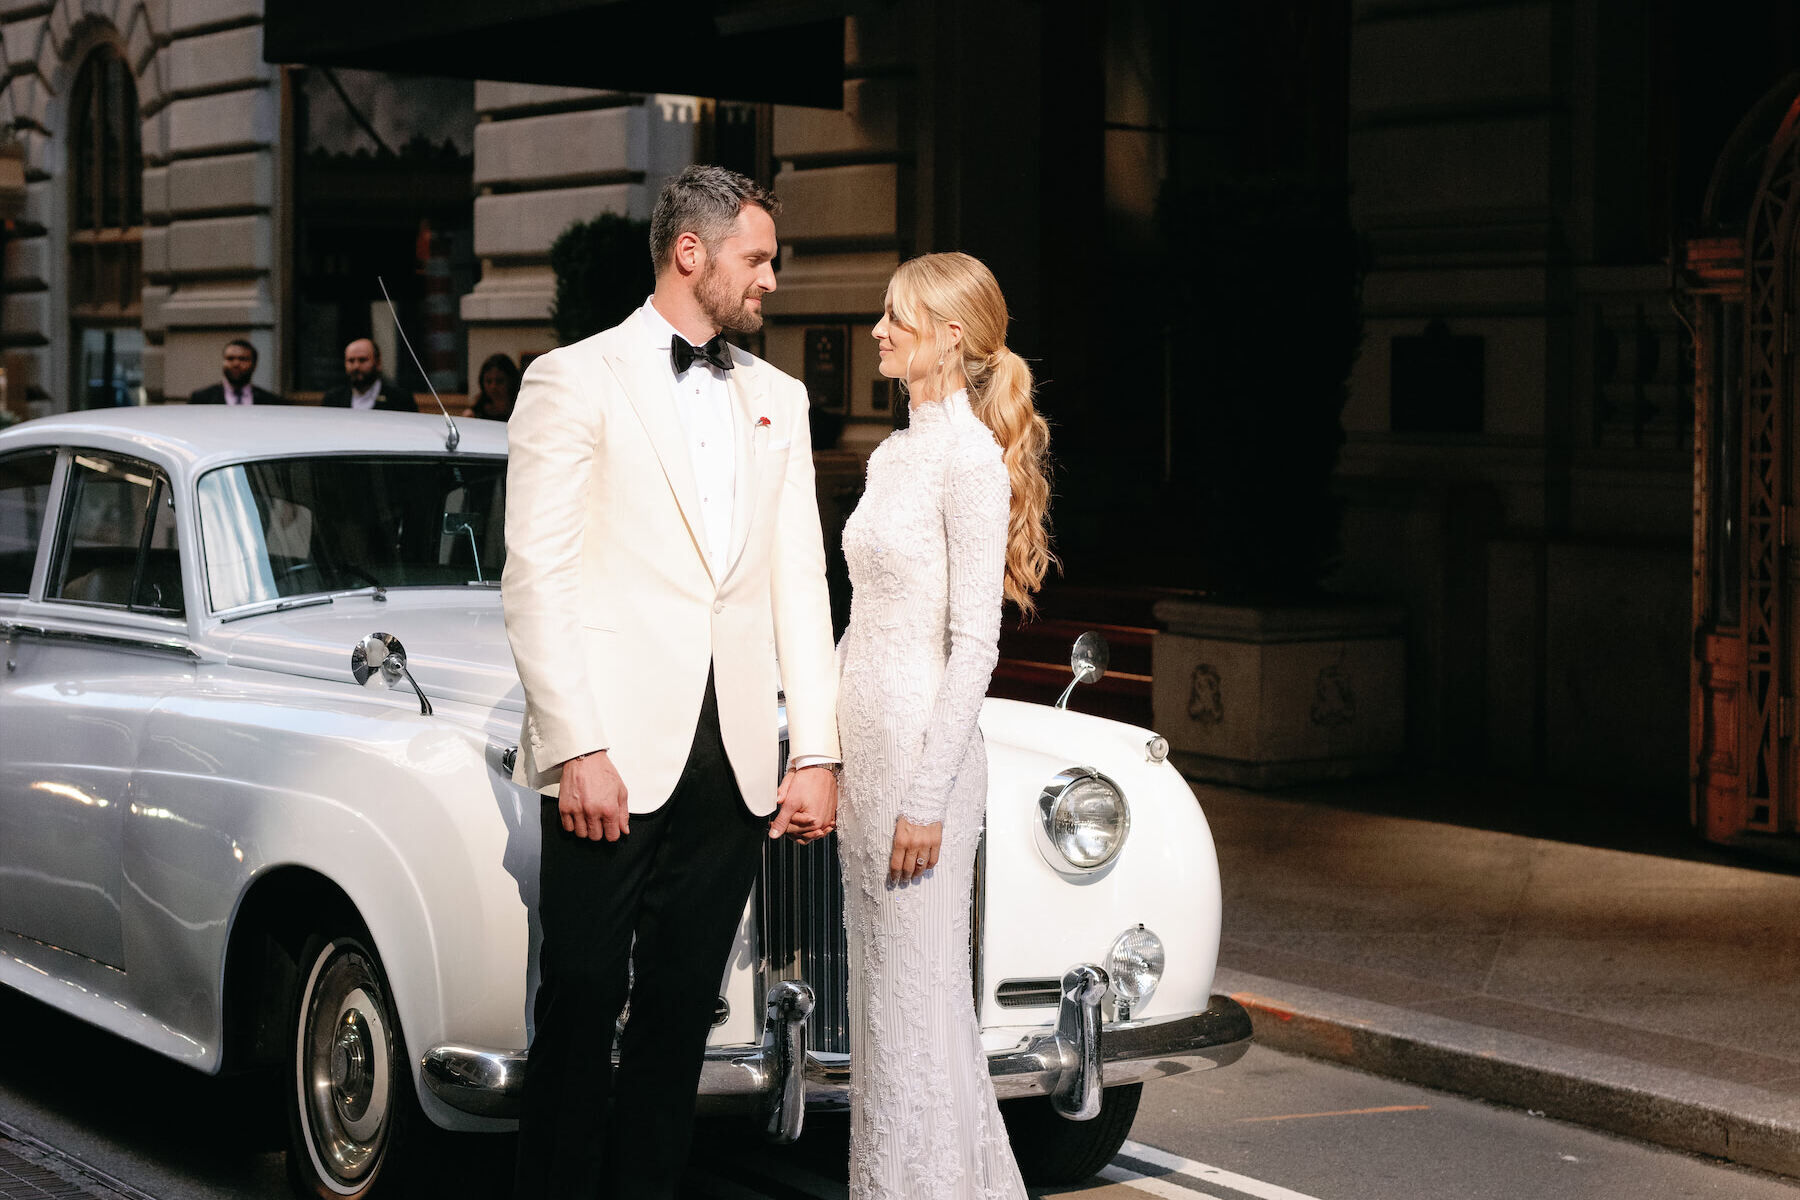 Kate Bock Kevin Love Wedding: Kevin Love and Kate Bock posing in front of a vintage car just before their wedding ceremony.